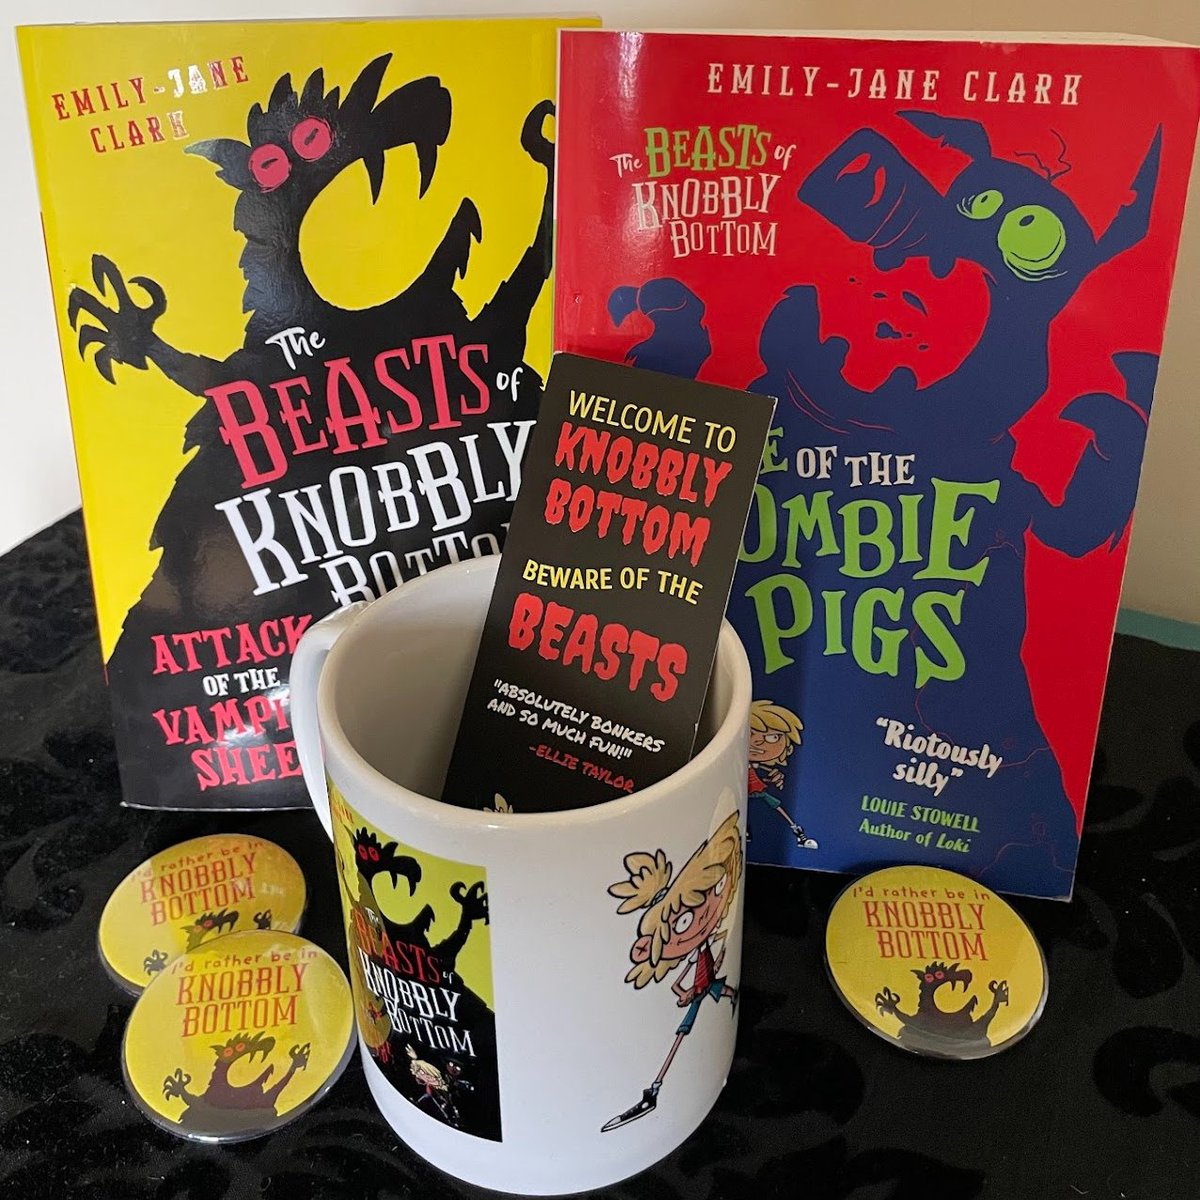 WIN my Waterstones Childrens Book Prize shortlisted book THE BEASTS OF KNOBBLY BOTTOM: ATTACK OF THE VAMPIRE SHEEP & RISE OF THE ZOMBIE PIGS, PLUS some knobbly bottom goodies! Simply write BOTTOMS UP in the comments and like & share this post! I will pick a winner on 19th May.